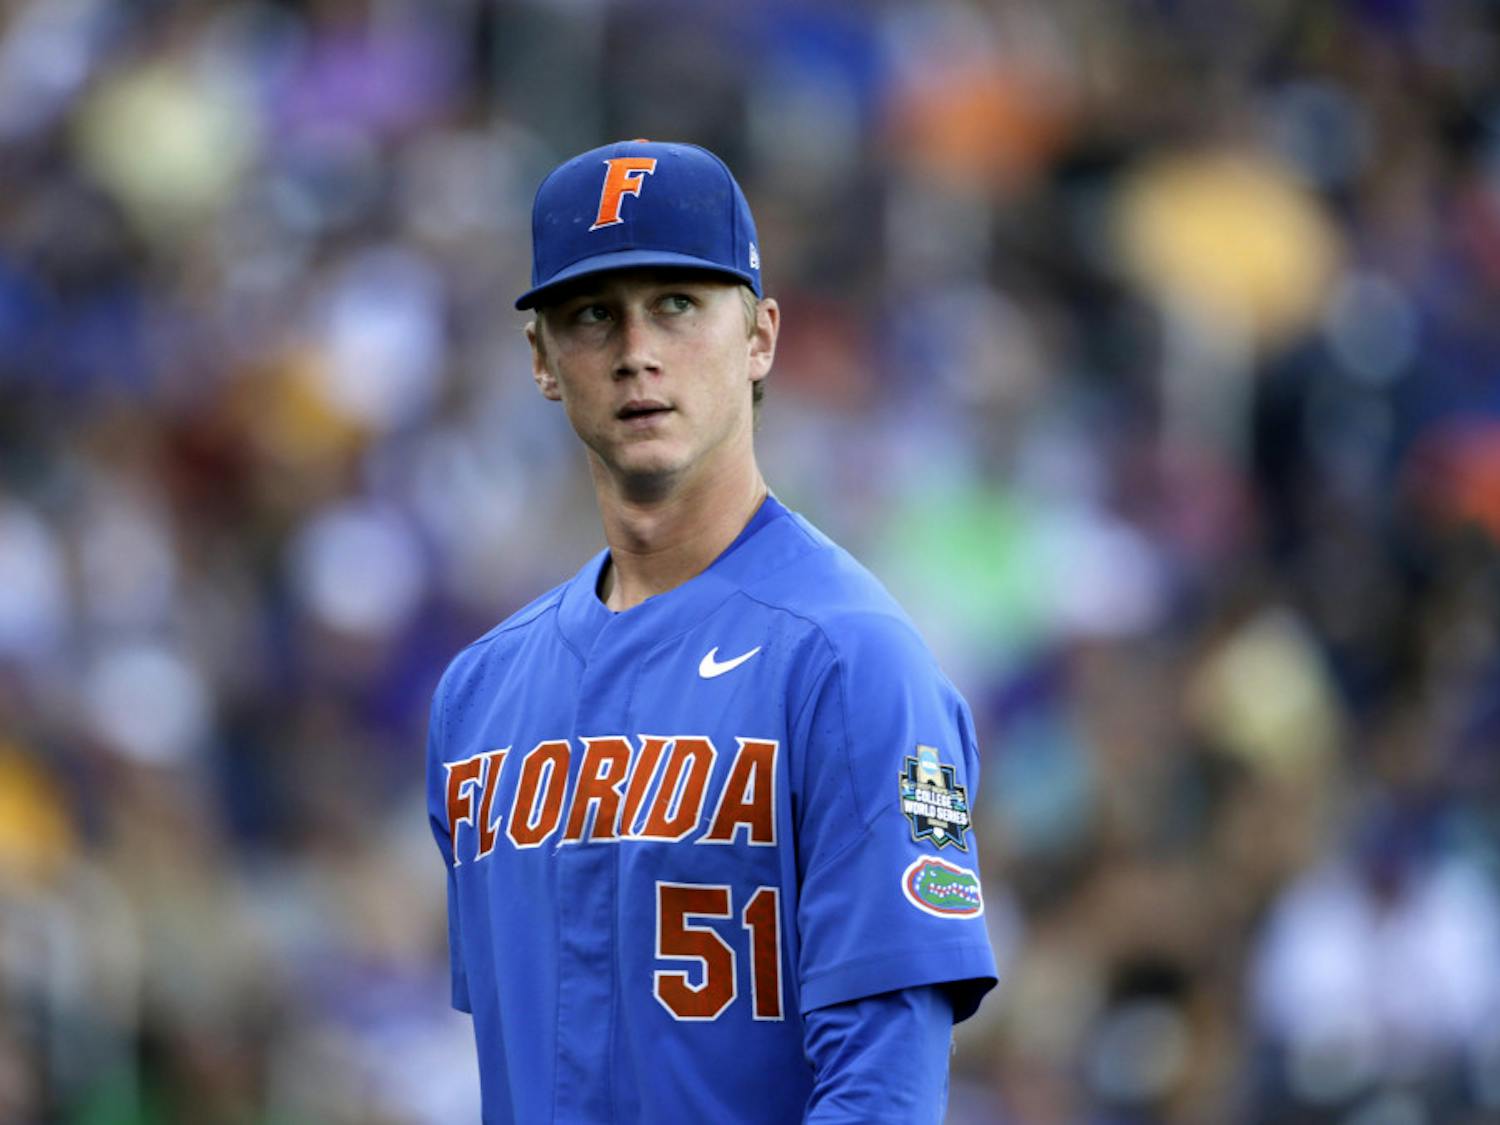 UF starting pitcher Brady Singer pitched 5.0 innings and gave up four runs on seven hits in Florida's elimination game loss to Arkansas on Friday.  